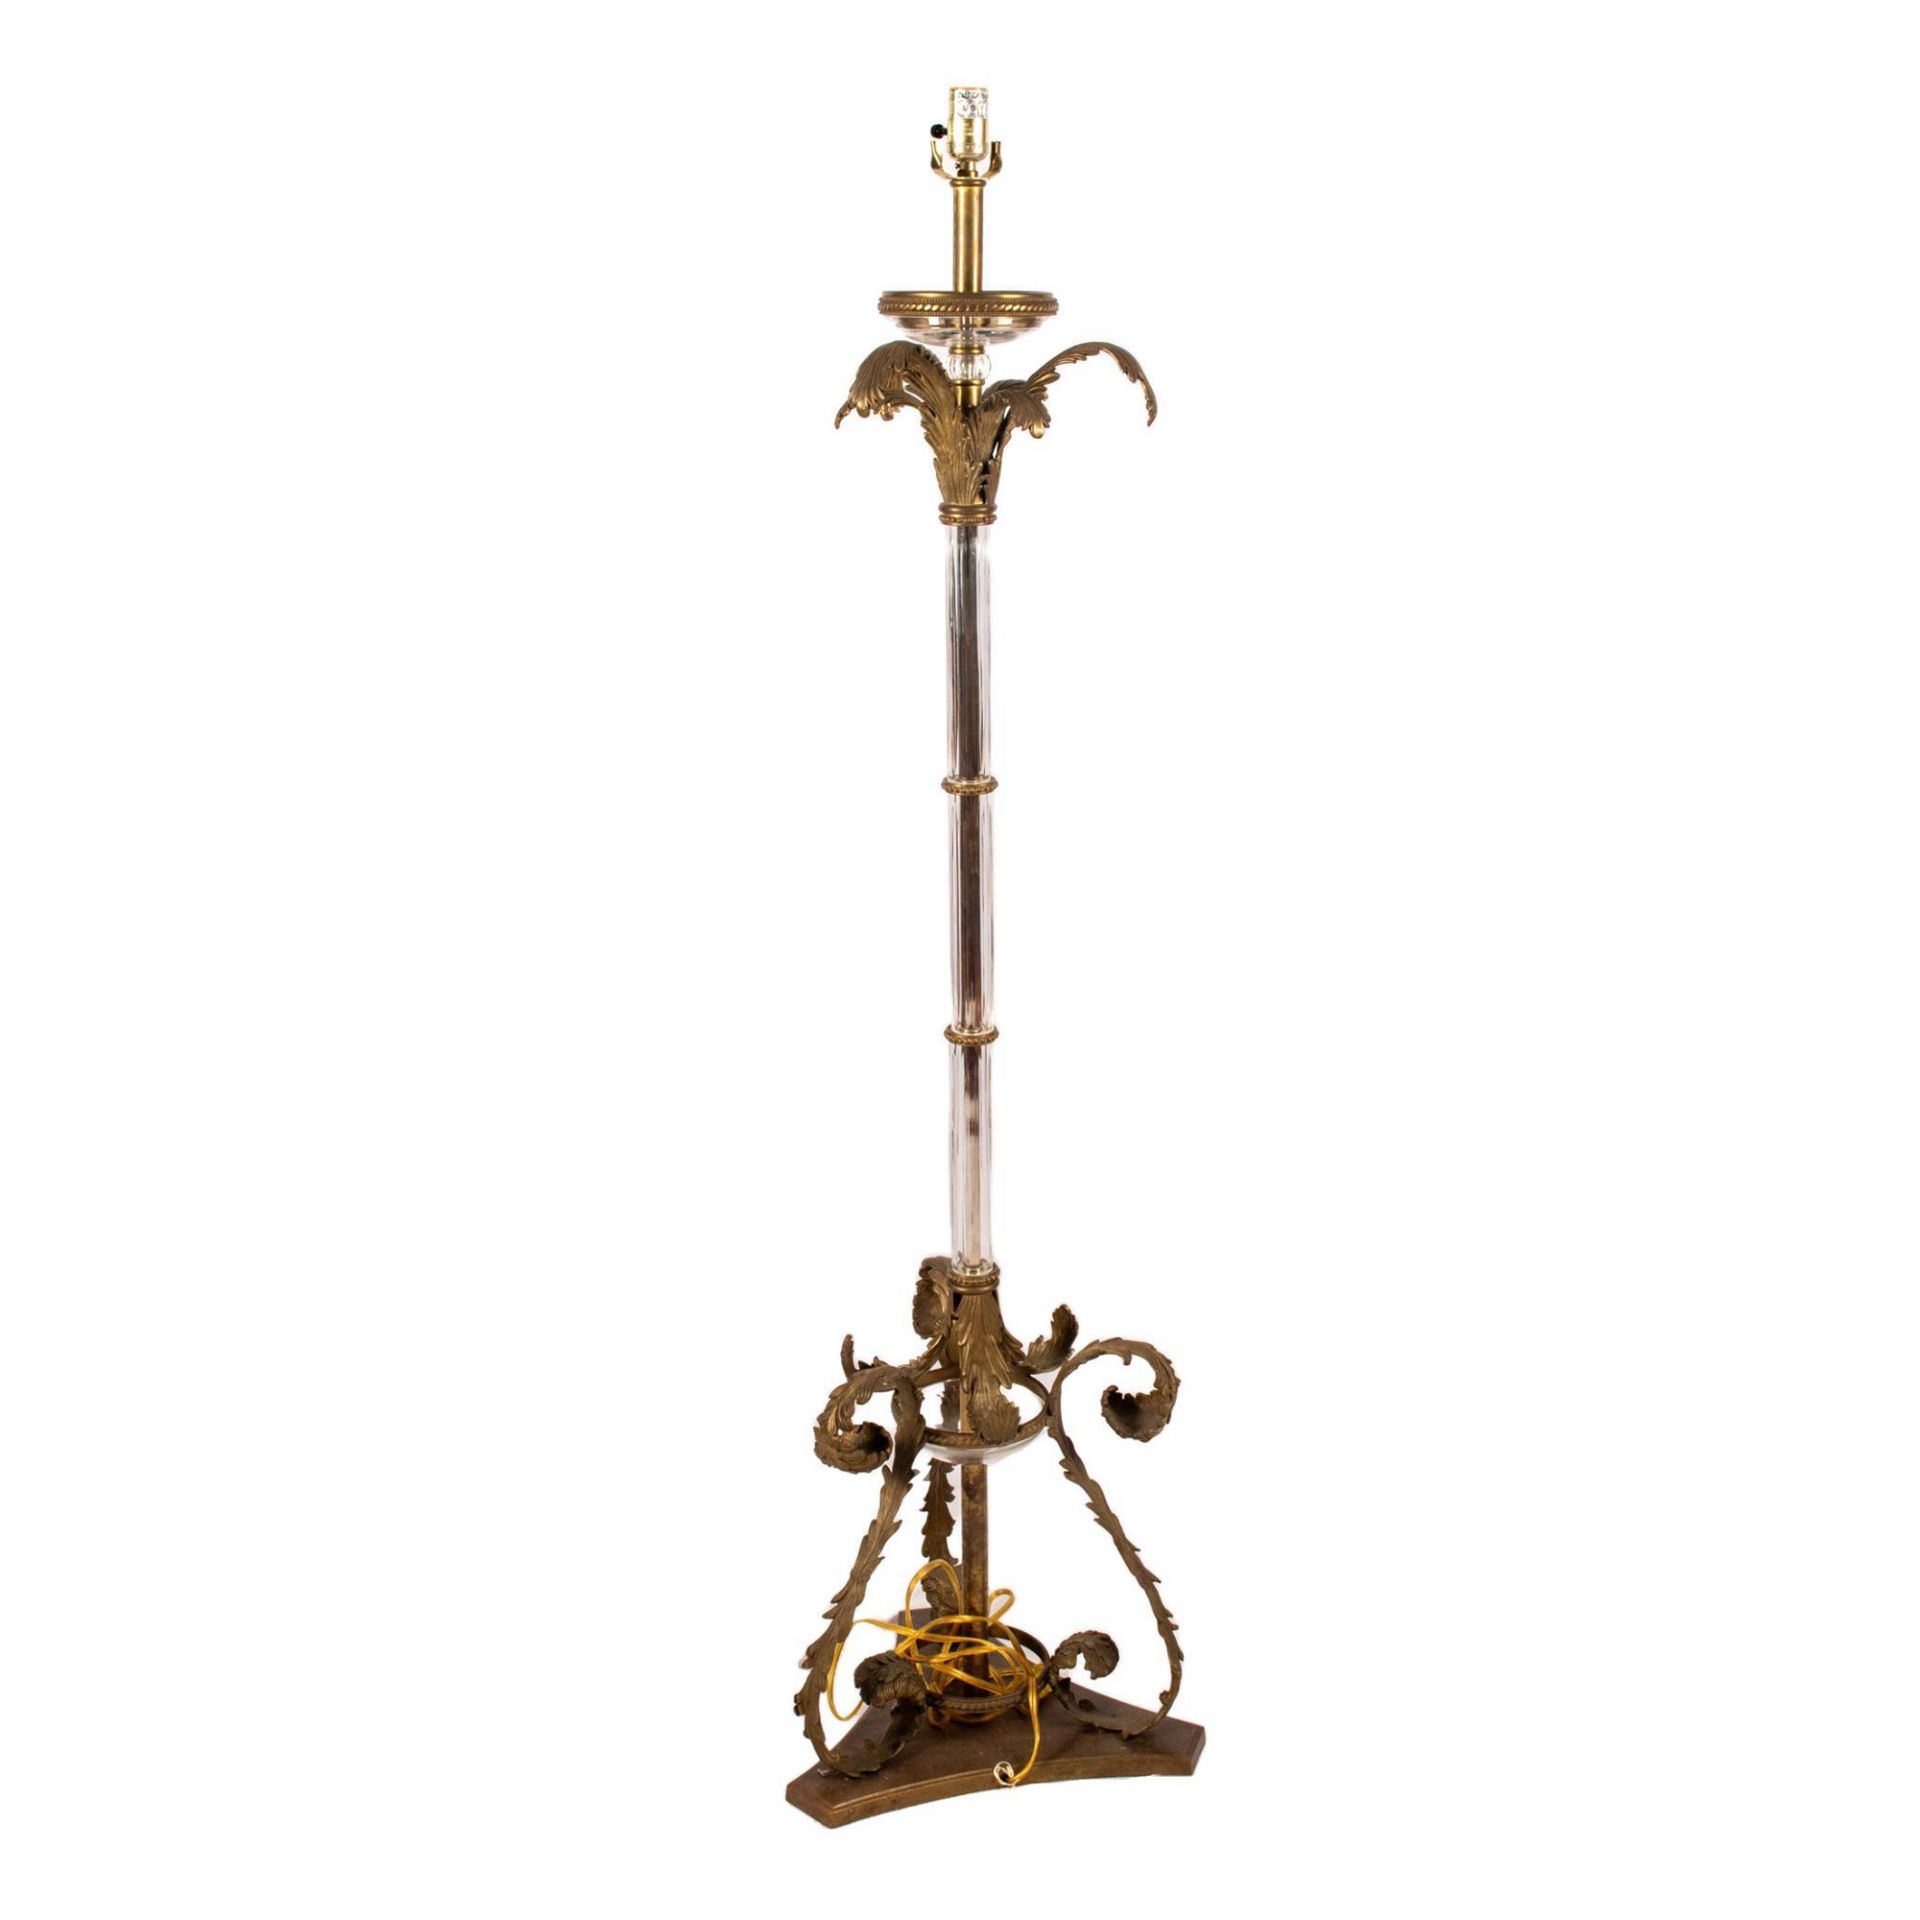 Baroque Style Brass and Glass Ornate Floor Lamp - Image 6 of 9